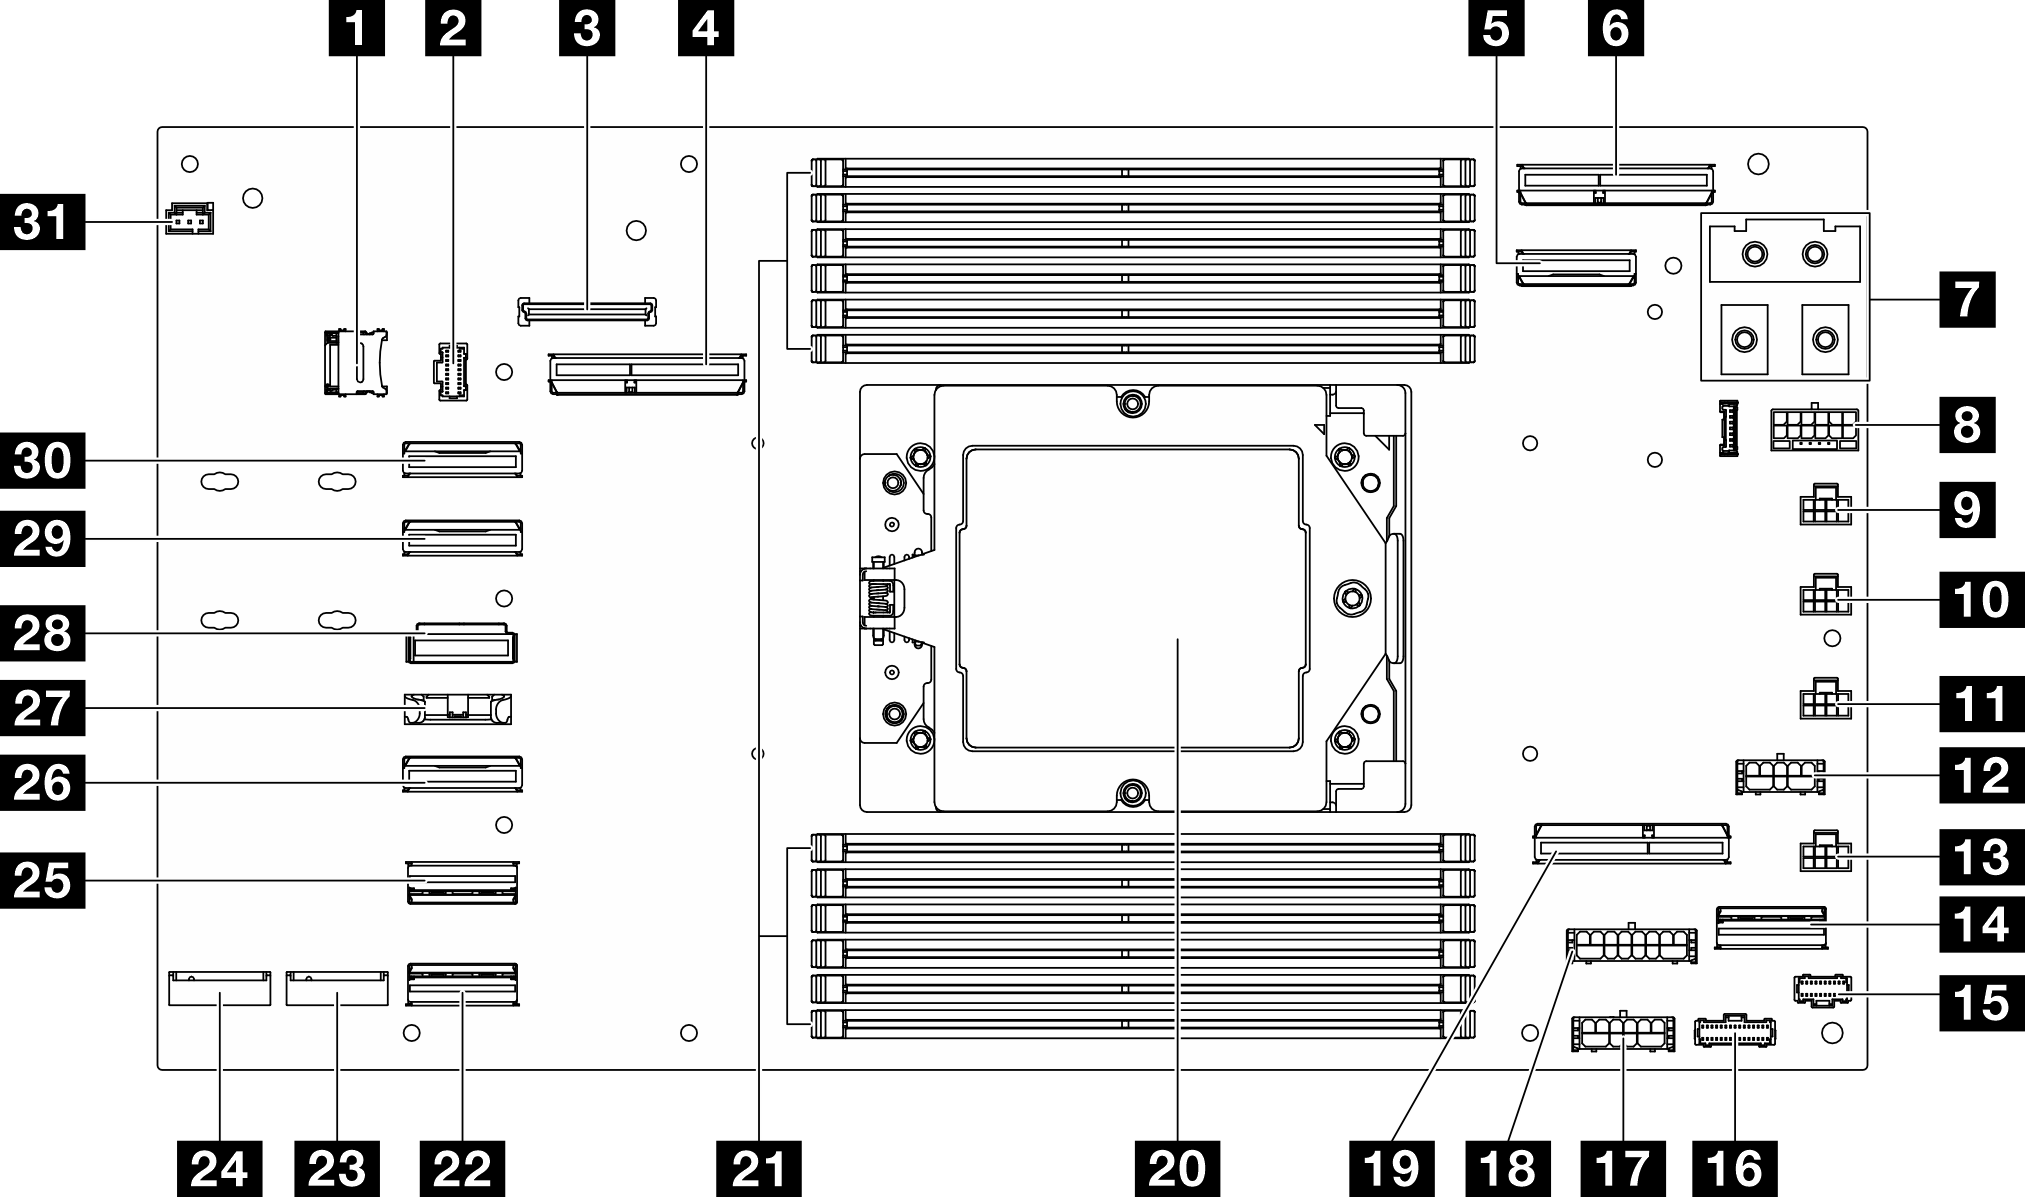 System-board connectors